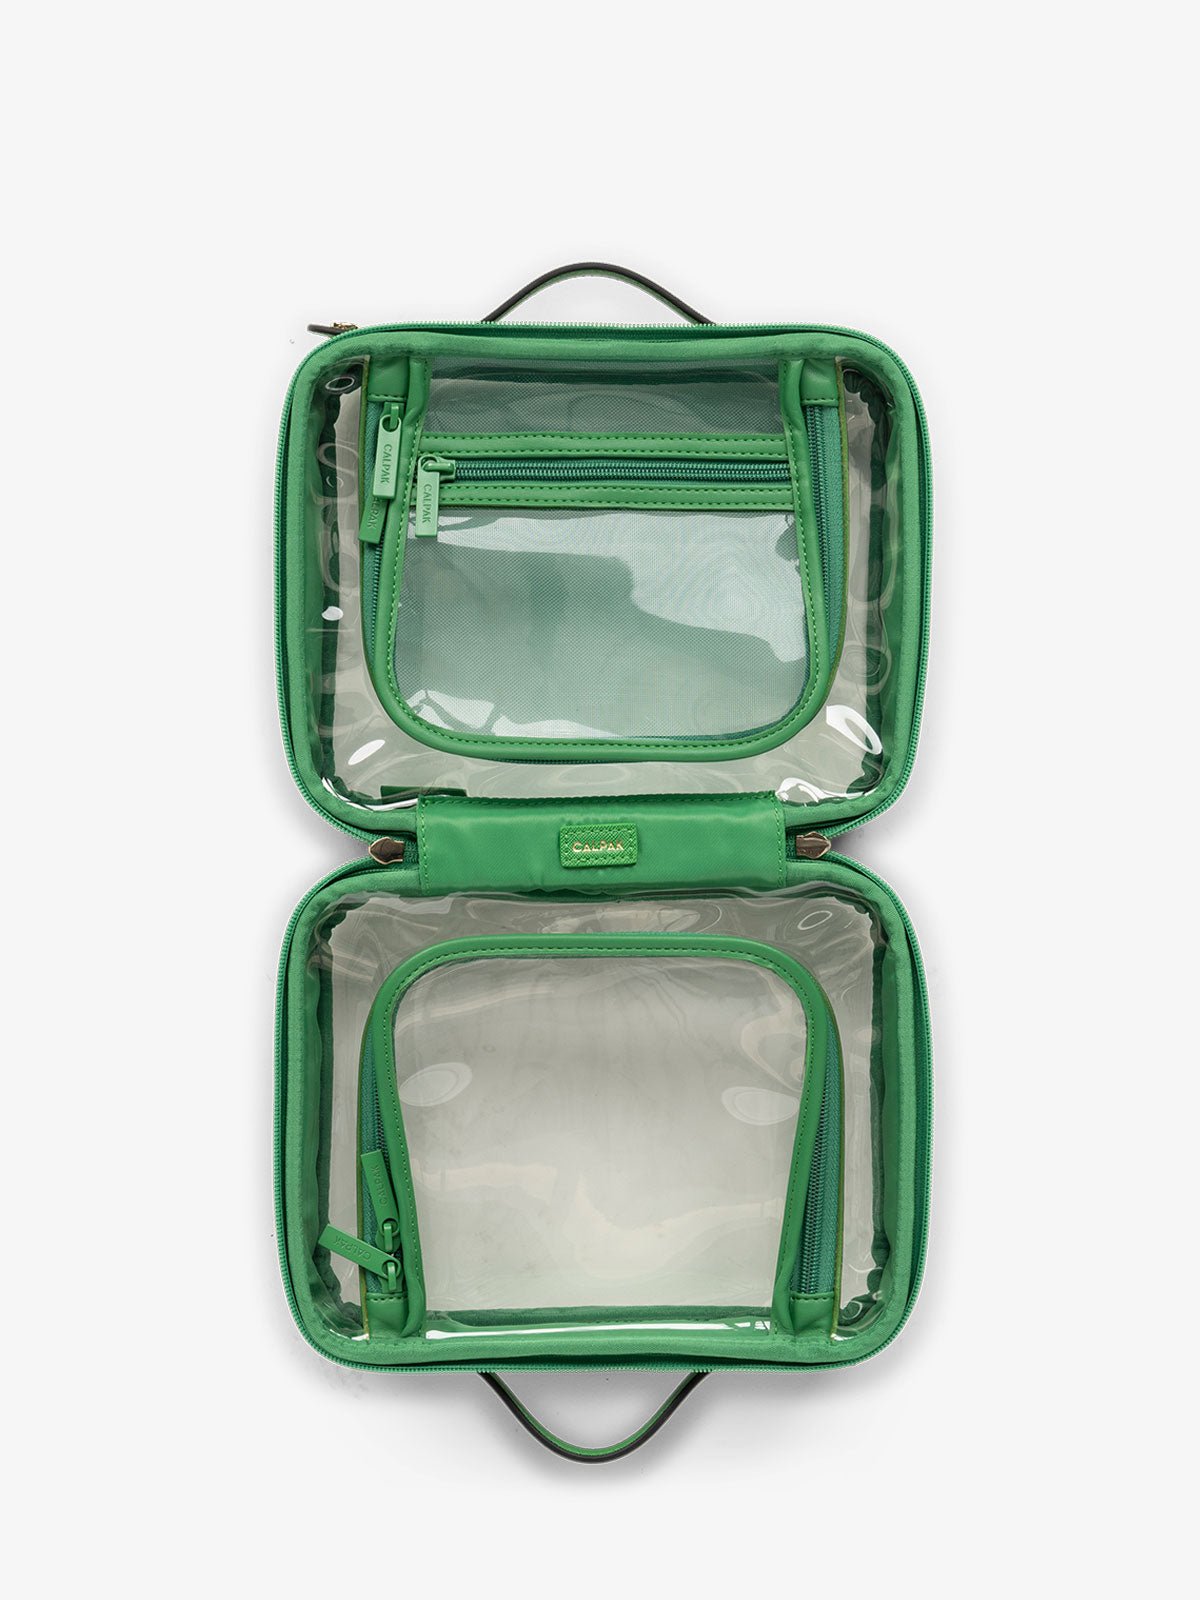 CALPAK clear travel makeup bag with zipper enclosed compartments in green